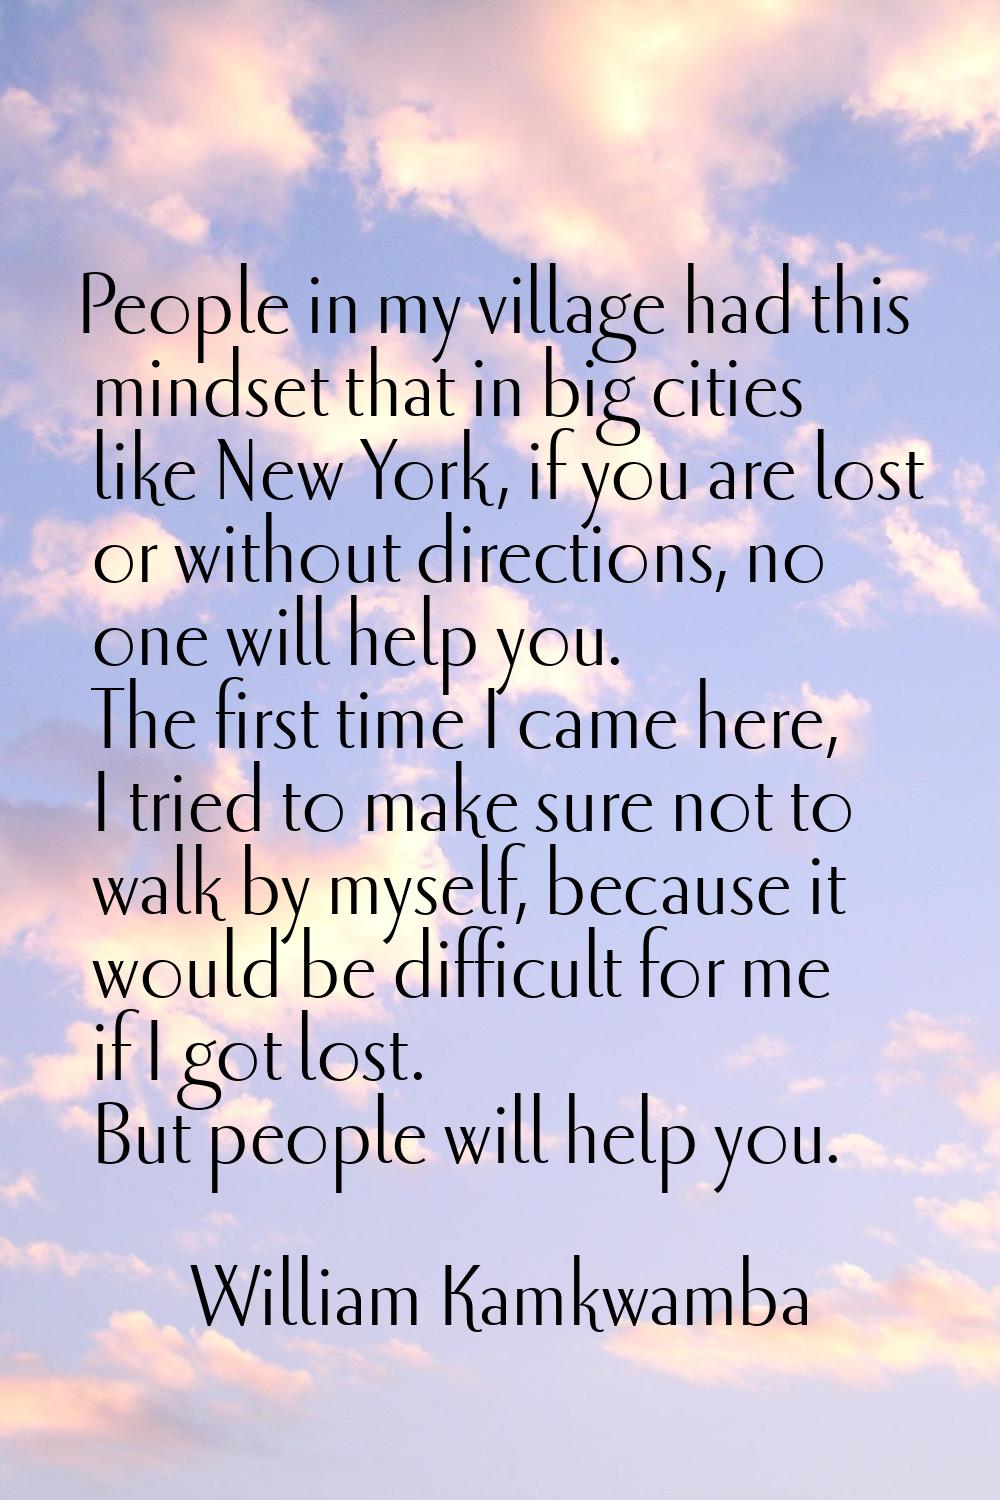 People in my village had this mindset that in big cities like New York, if you are lost or without 